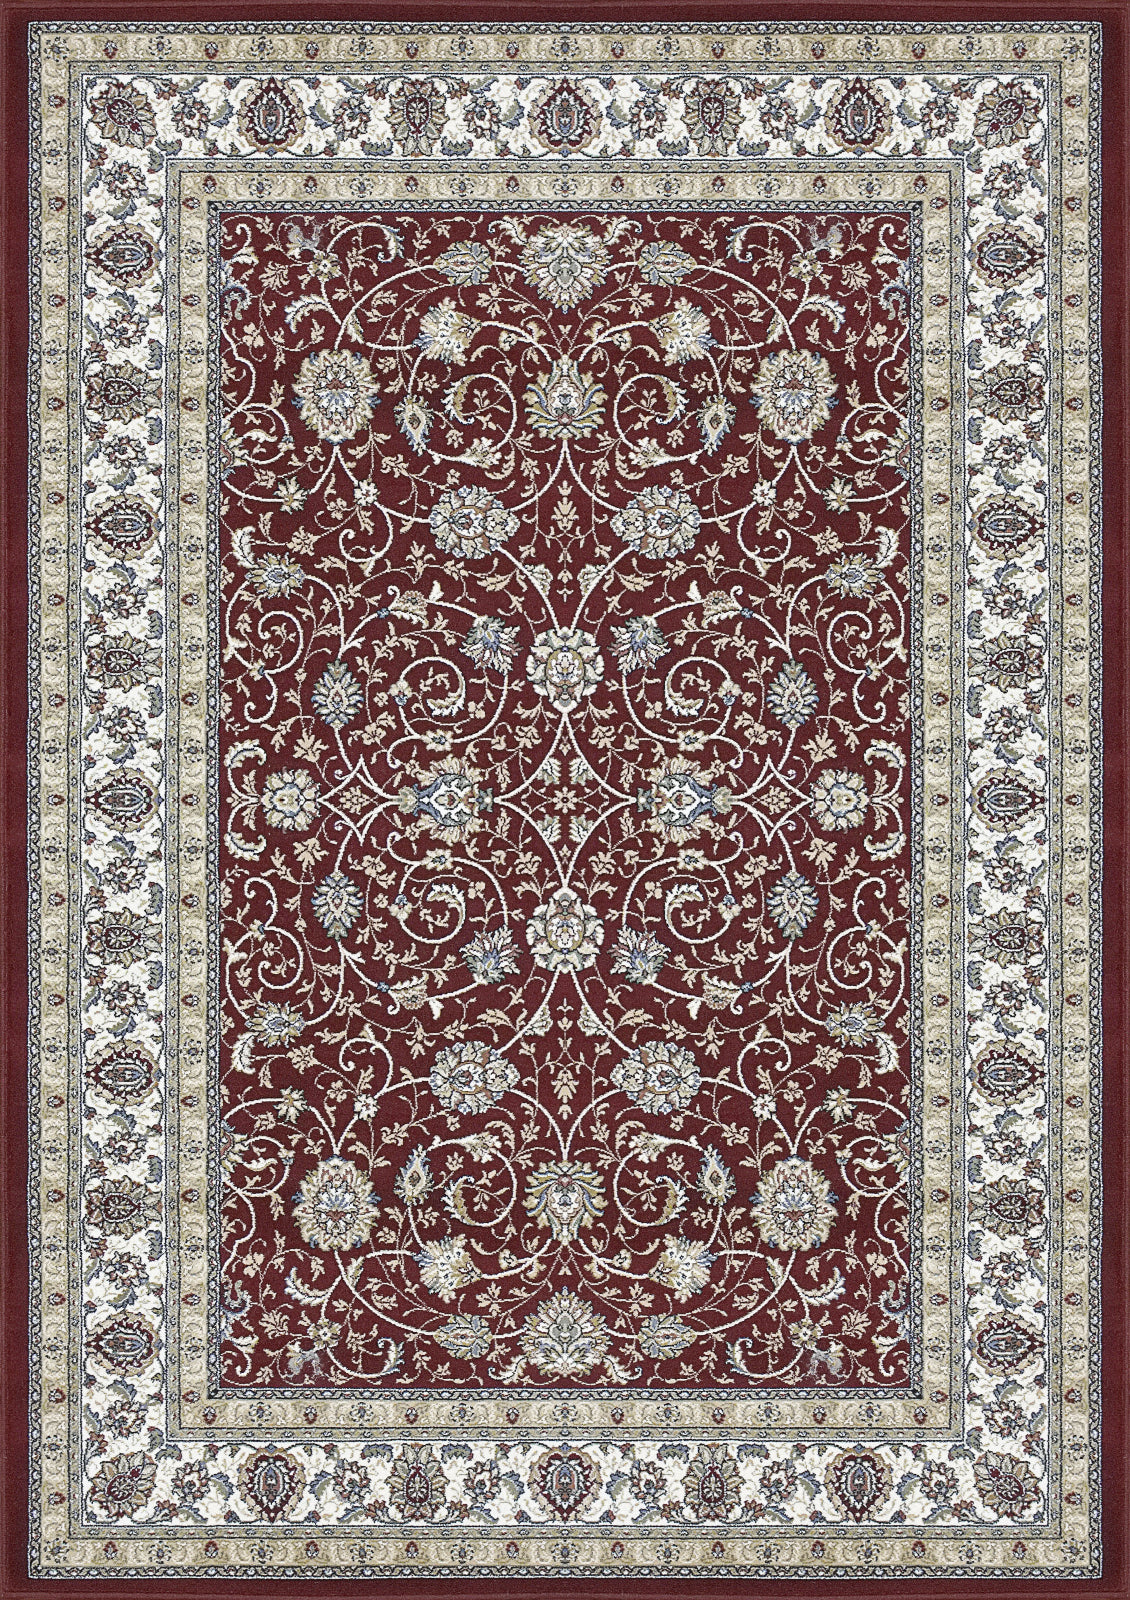 Dynamic Rugs Ancient Garden 57120 Red/Ivory Area Rug main image